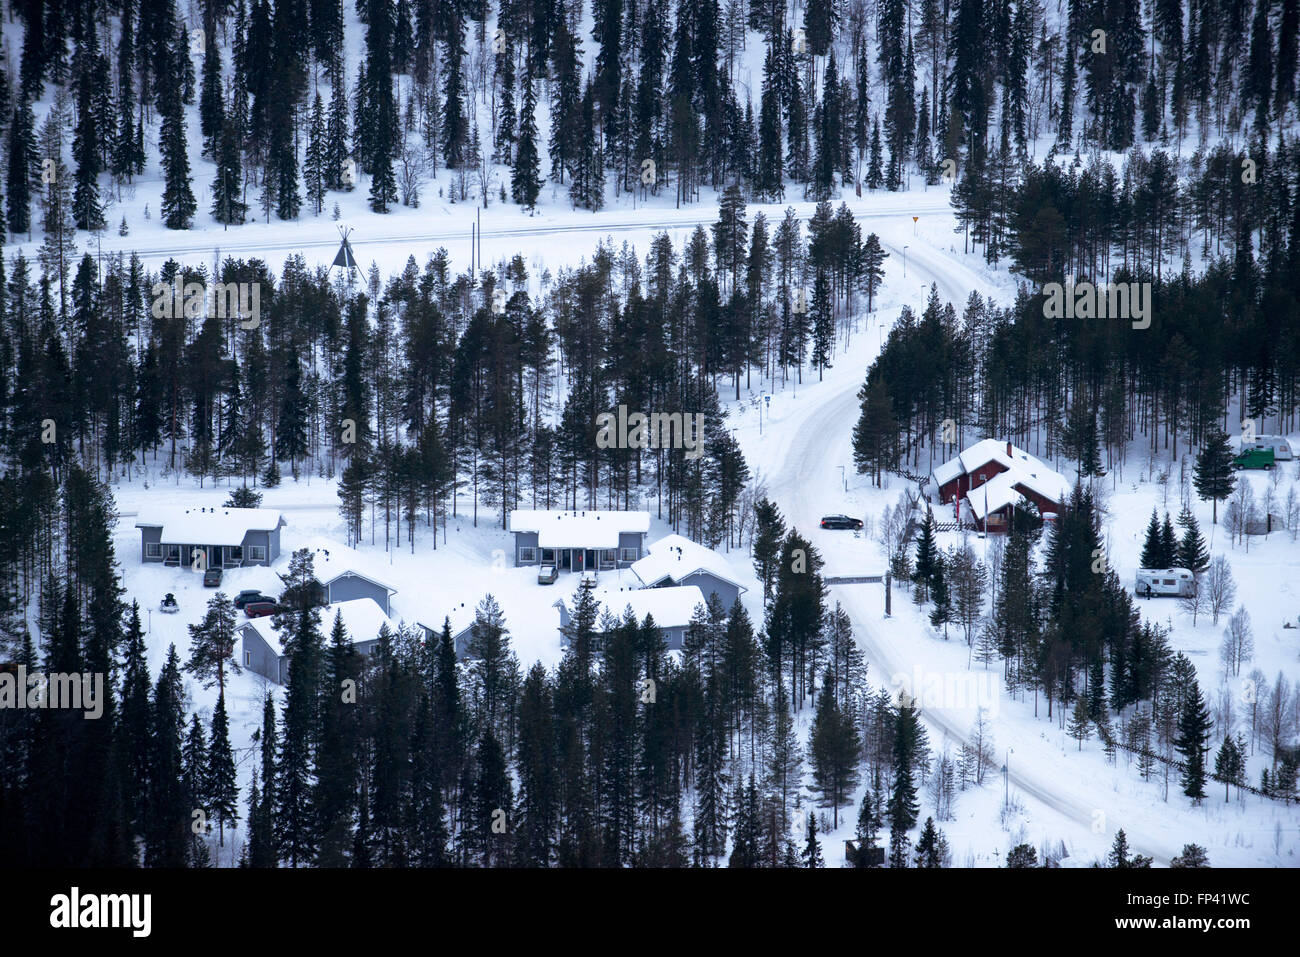 Hotels near the Salla ski resort. Deep in the wilderness of heavily snow laden coniferous trees and rugged fell highland, in the Stock Photo